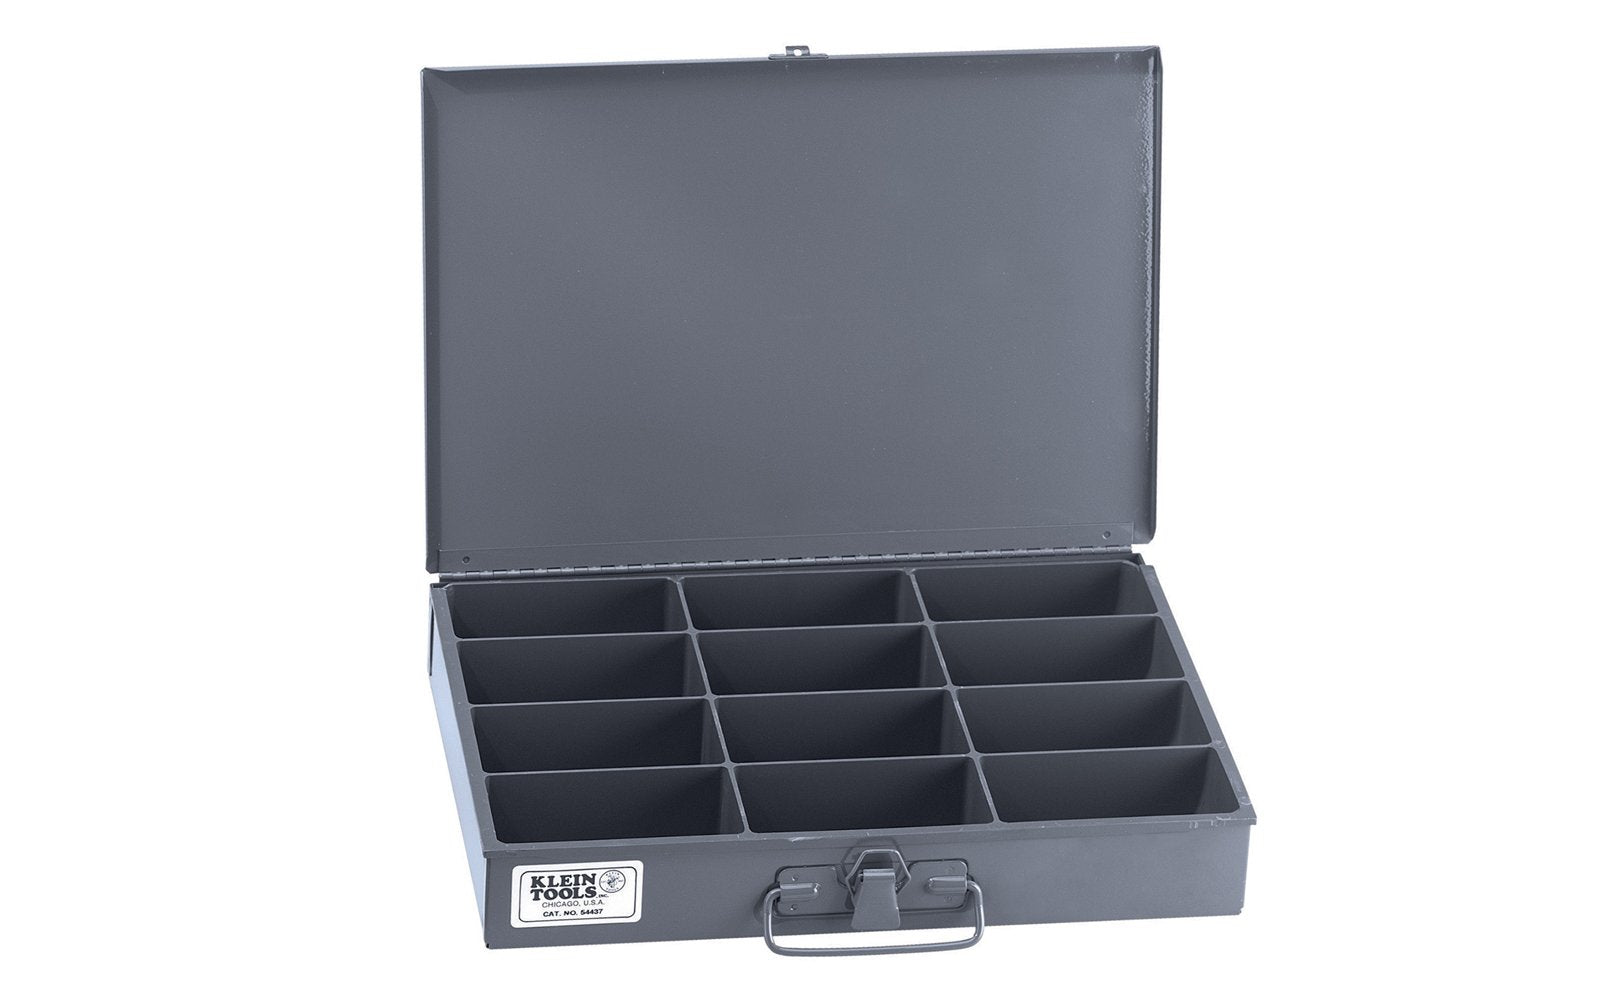 Klein Tools - Made in USA - Model 54437 - Outside box features strong metal, rigid, heavy-duty welded construction - Inside box compartments feature high-impact styrene construction - Compartment Sizes: 4-1/4" x 2-1/4" - Overall Size:  9-3/4" Deep x 13-1/2" Wide x 2" High - Box has a carrying handle - piano hinge  - 